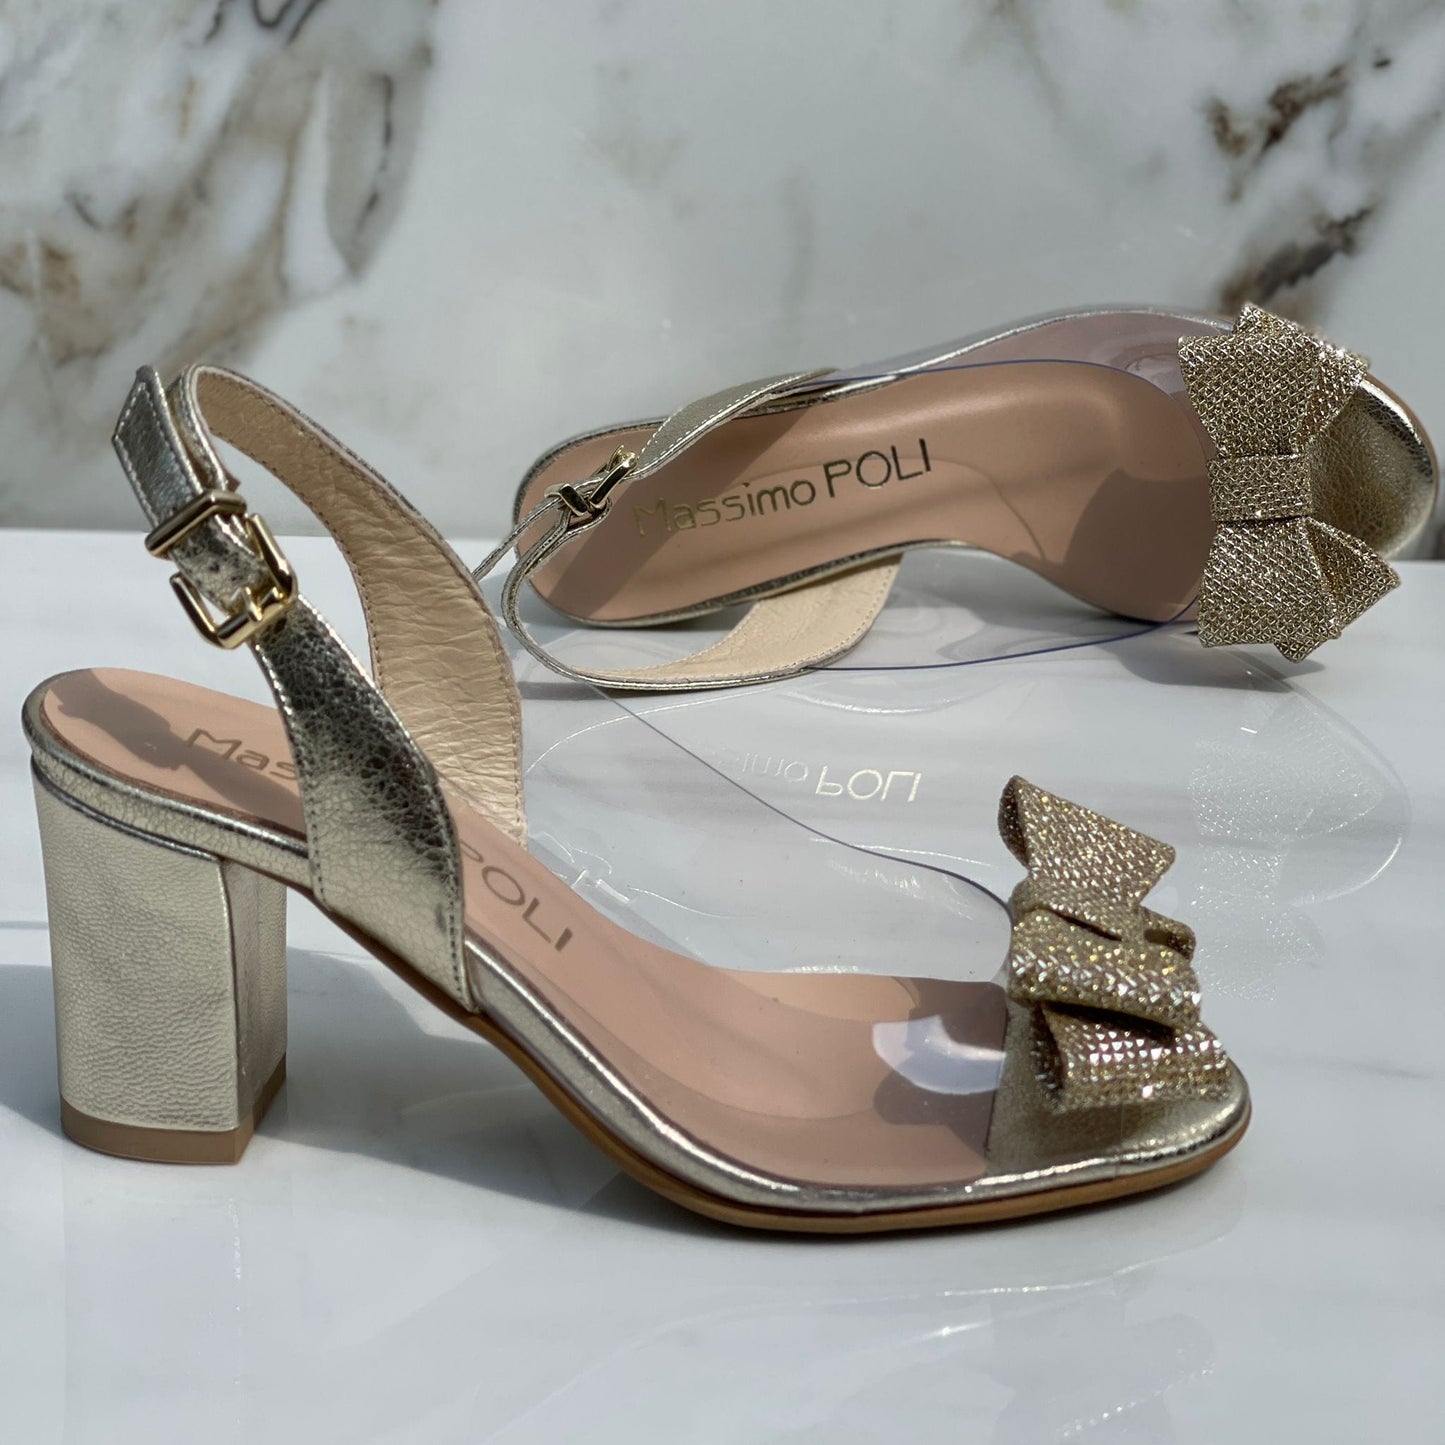 Petite wedding sandals in gold with a bow